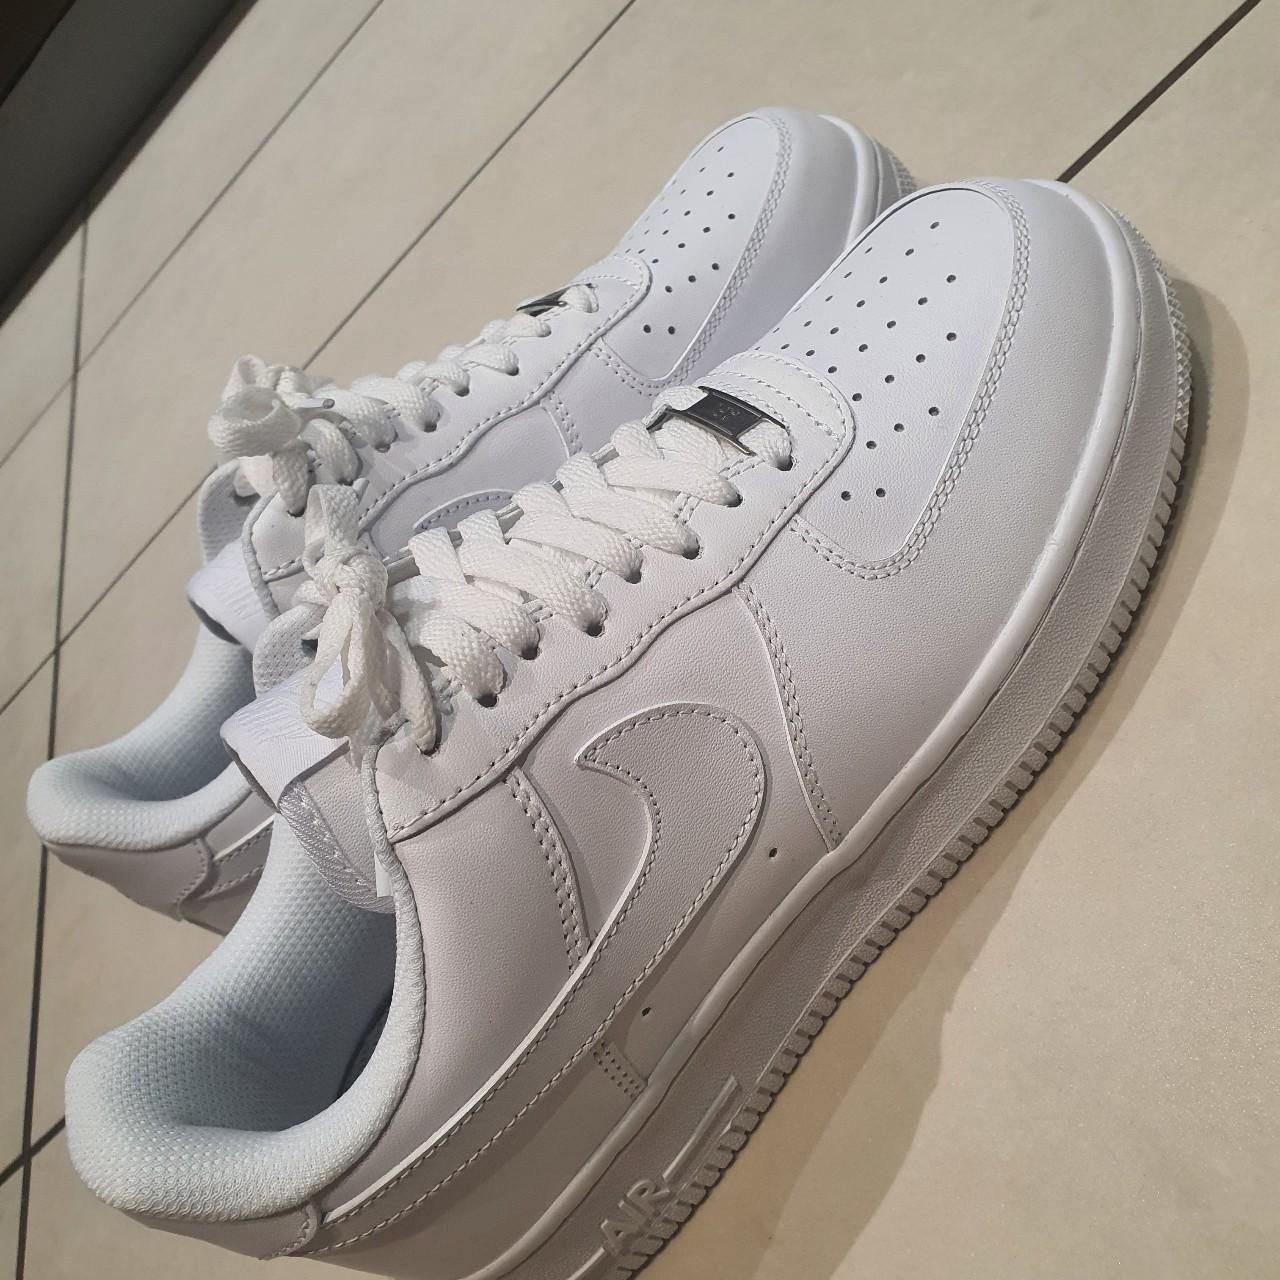 Nike Air Force 1 Low. Unwanted gift as already have... - Depop